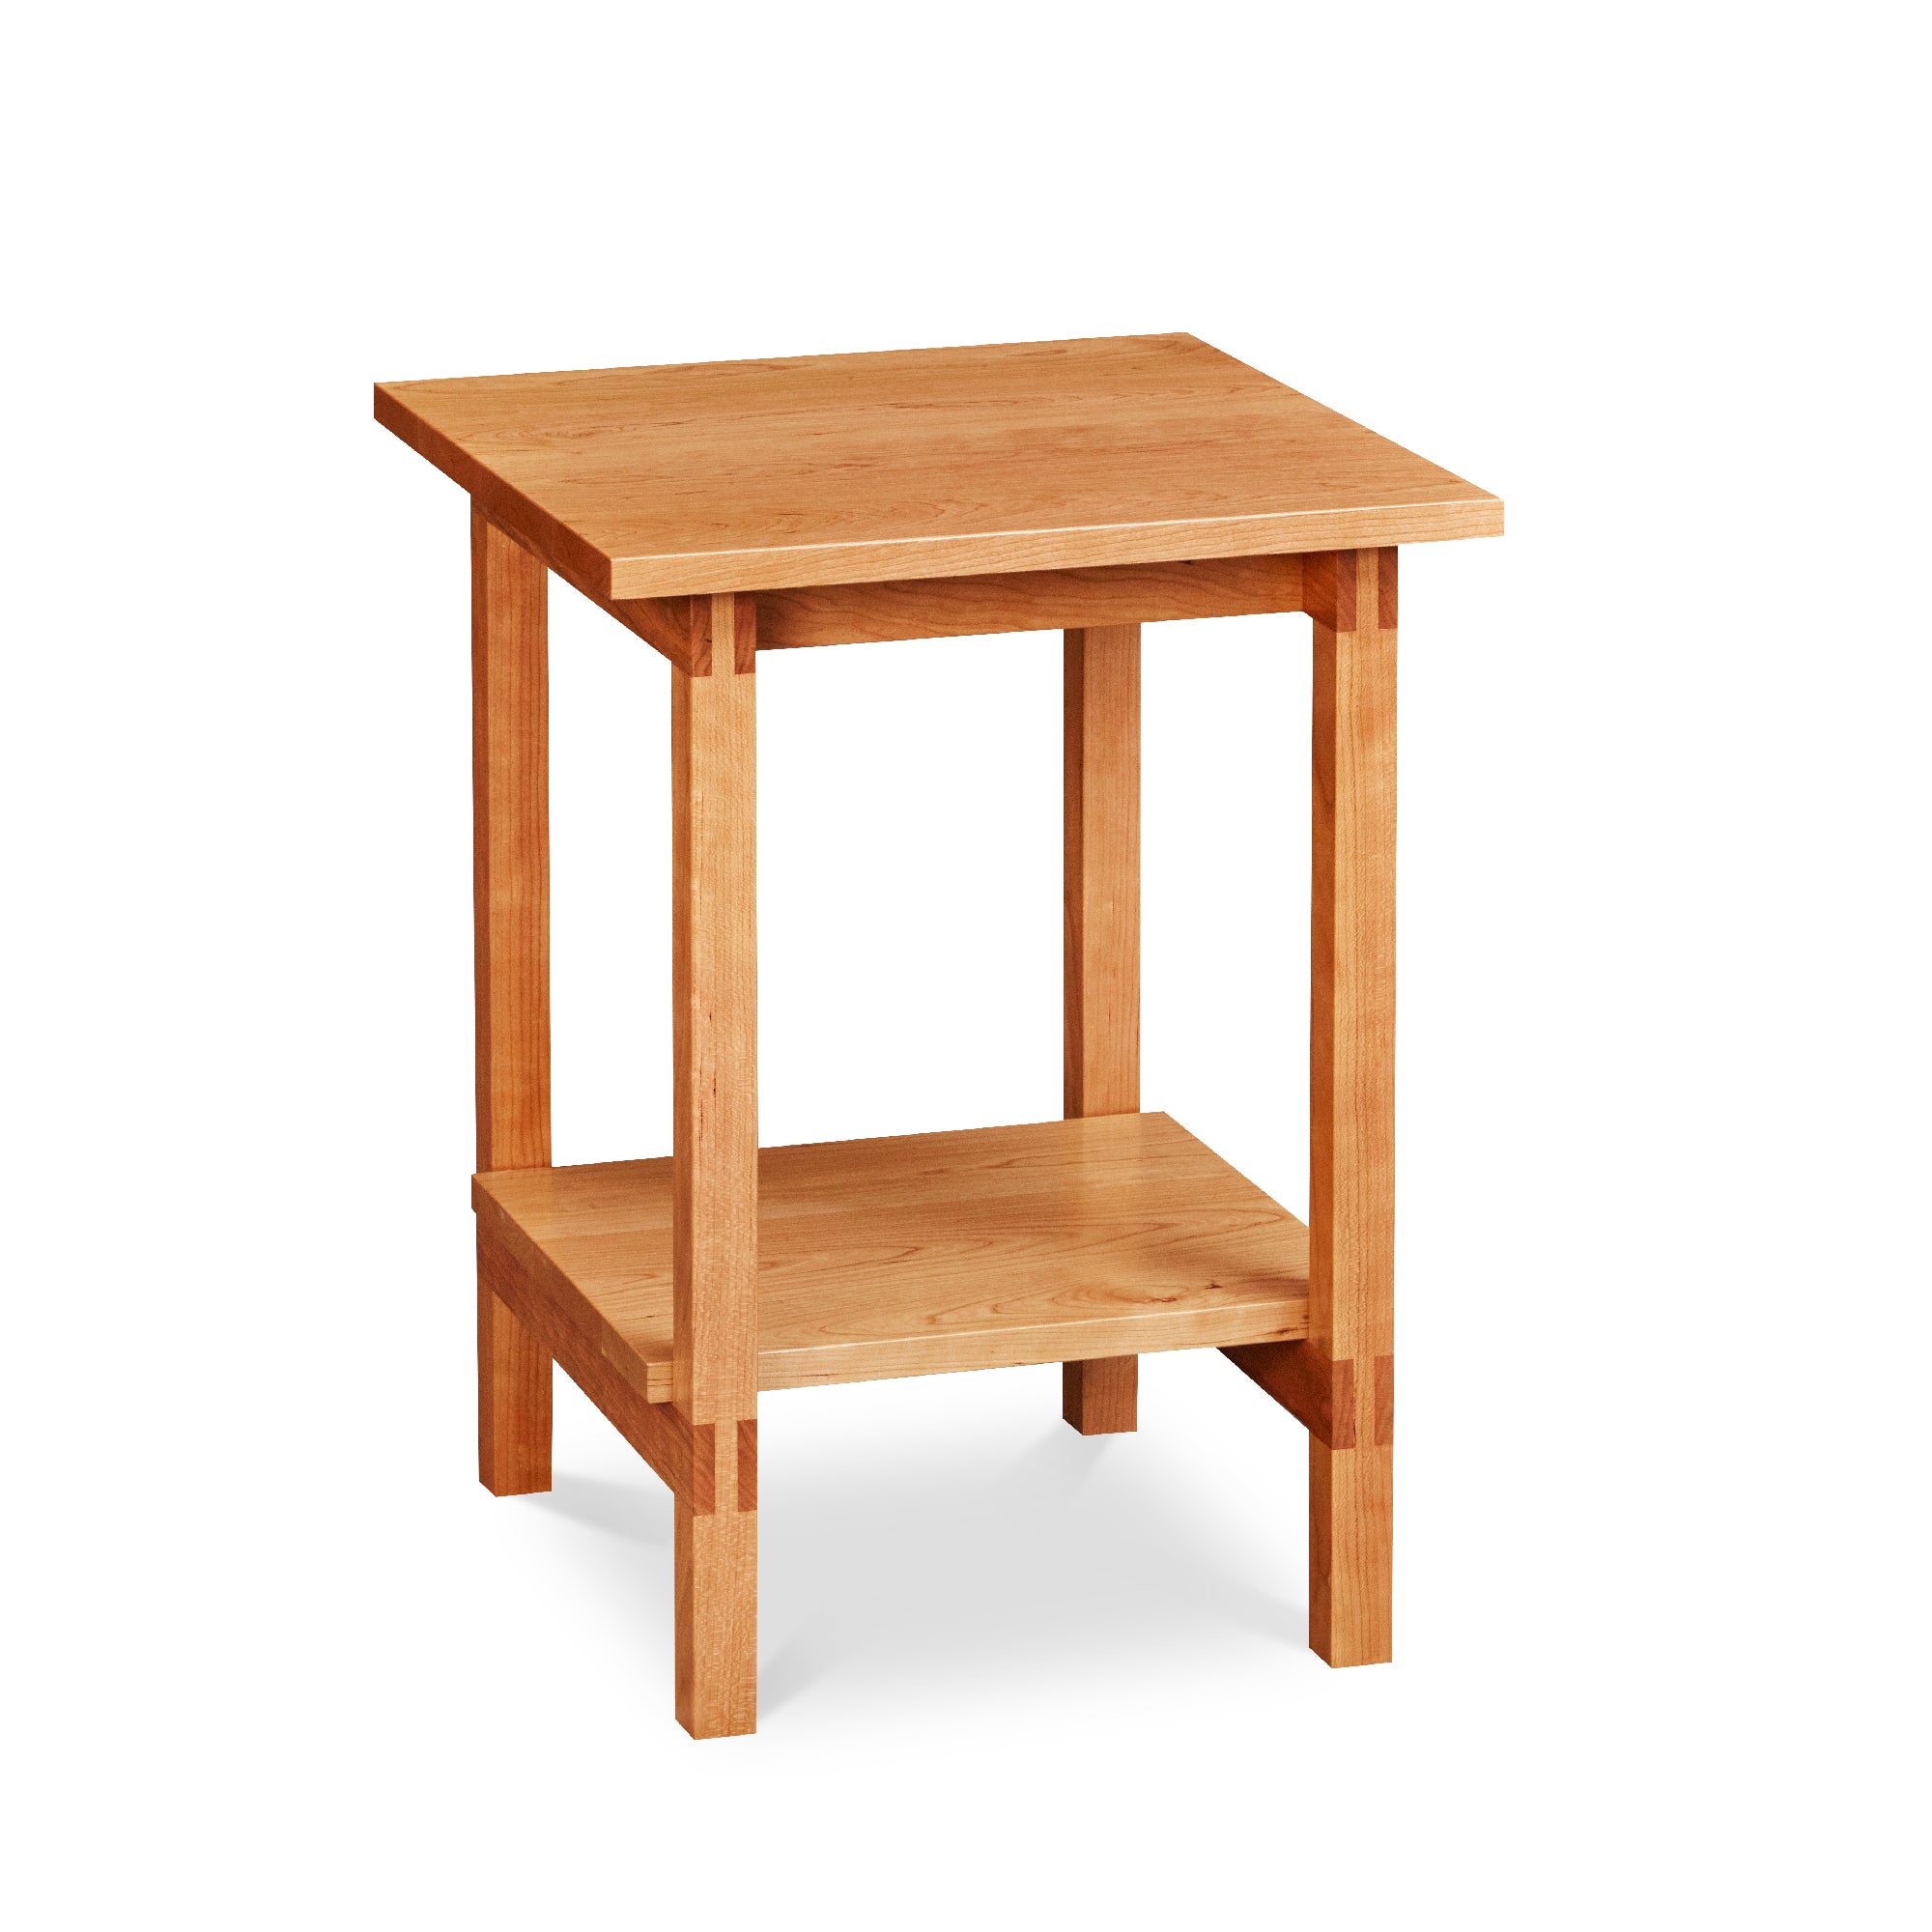 Modern trestle-style side table with visible joinery and low shelf in cherry, from Maine's Chilton Furniture Co.